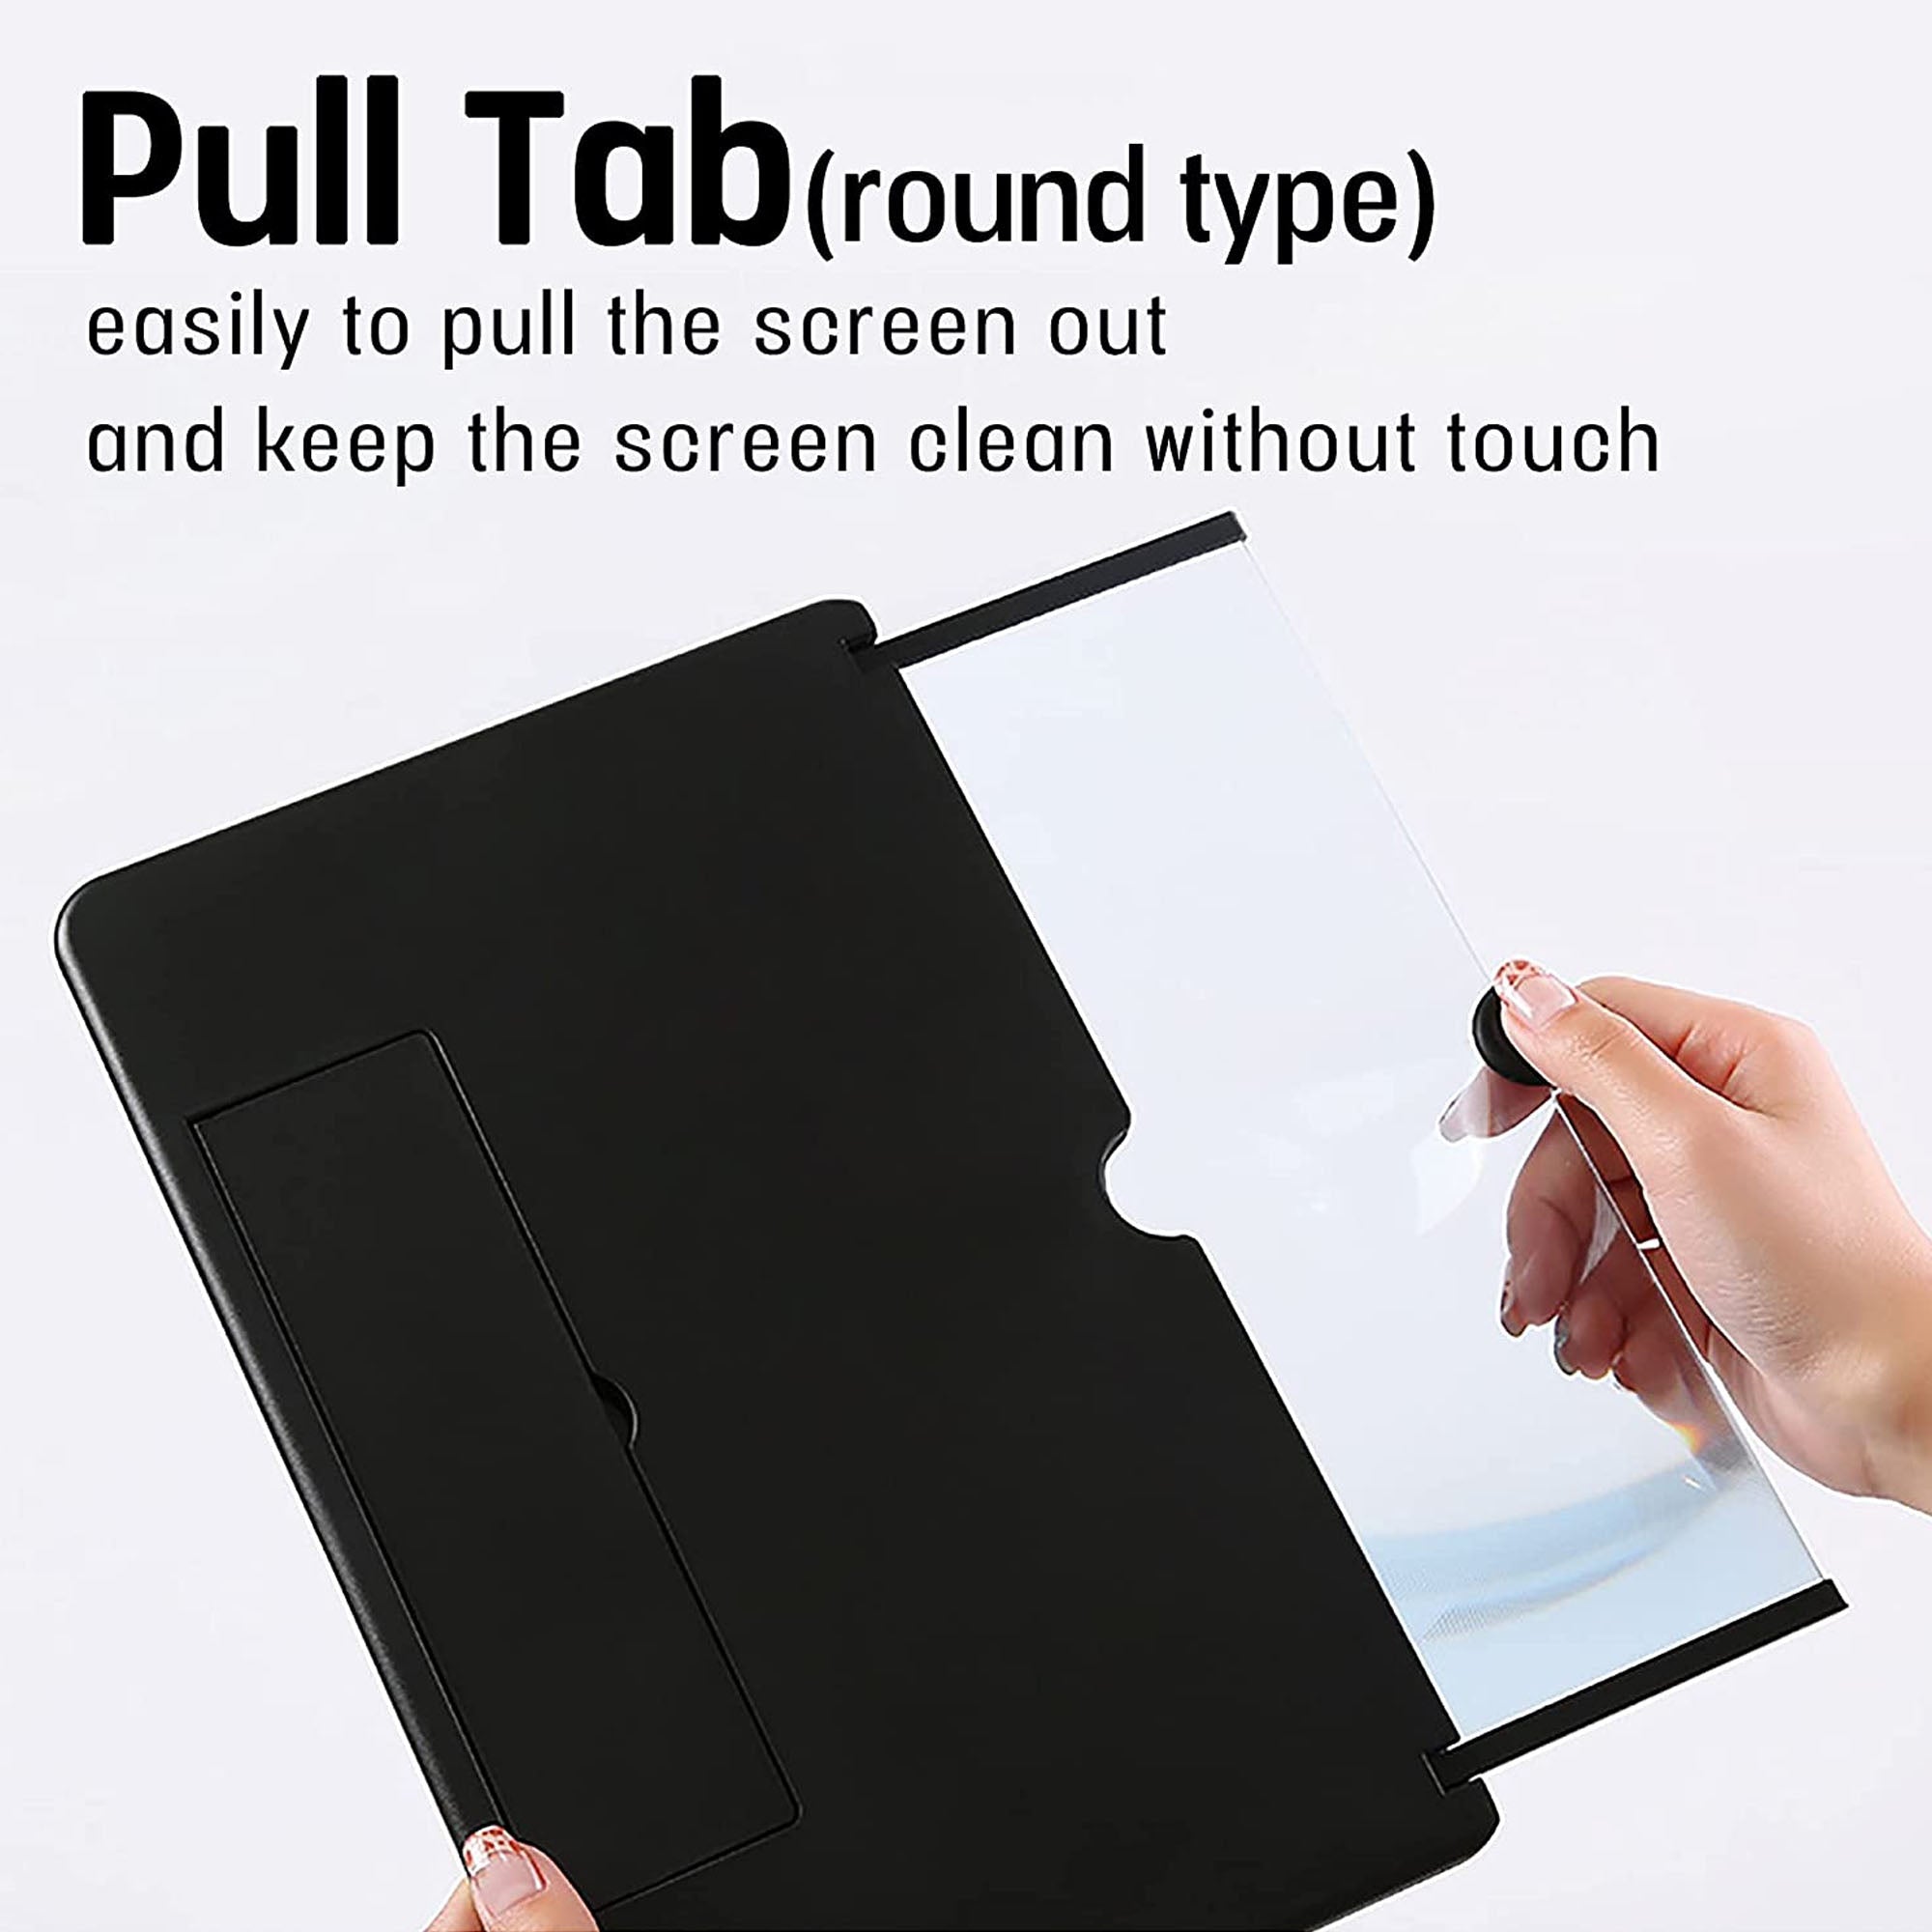 Screen Magnifier for Smartphone-Magnifying Projector Screen - Portable Universal Screen Amplifier for Video and Gaming Compatible with All Smartphones